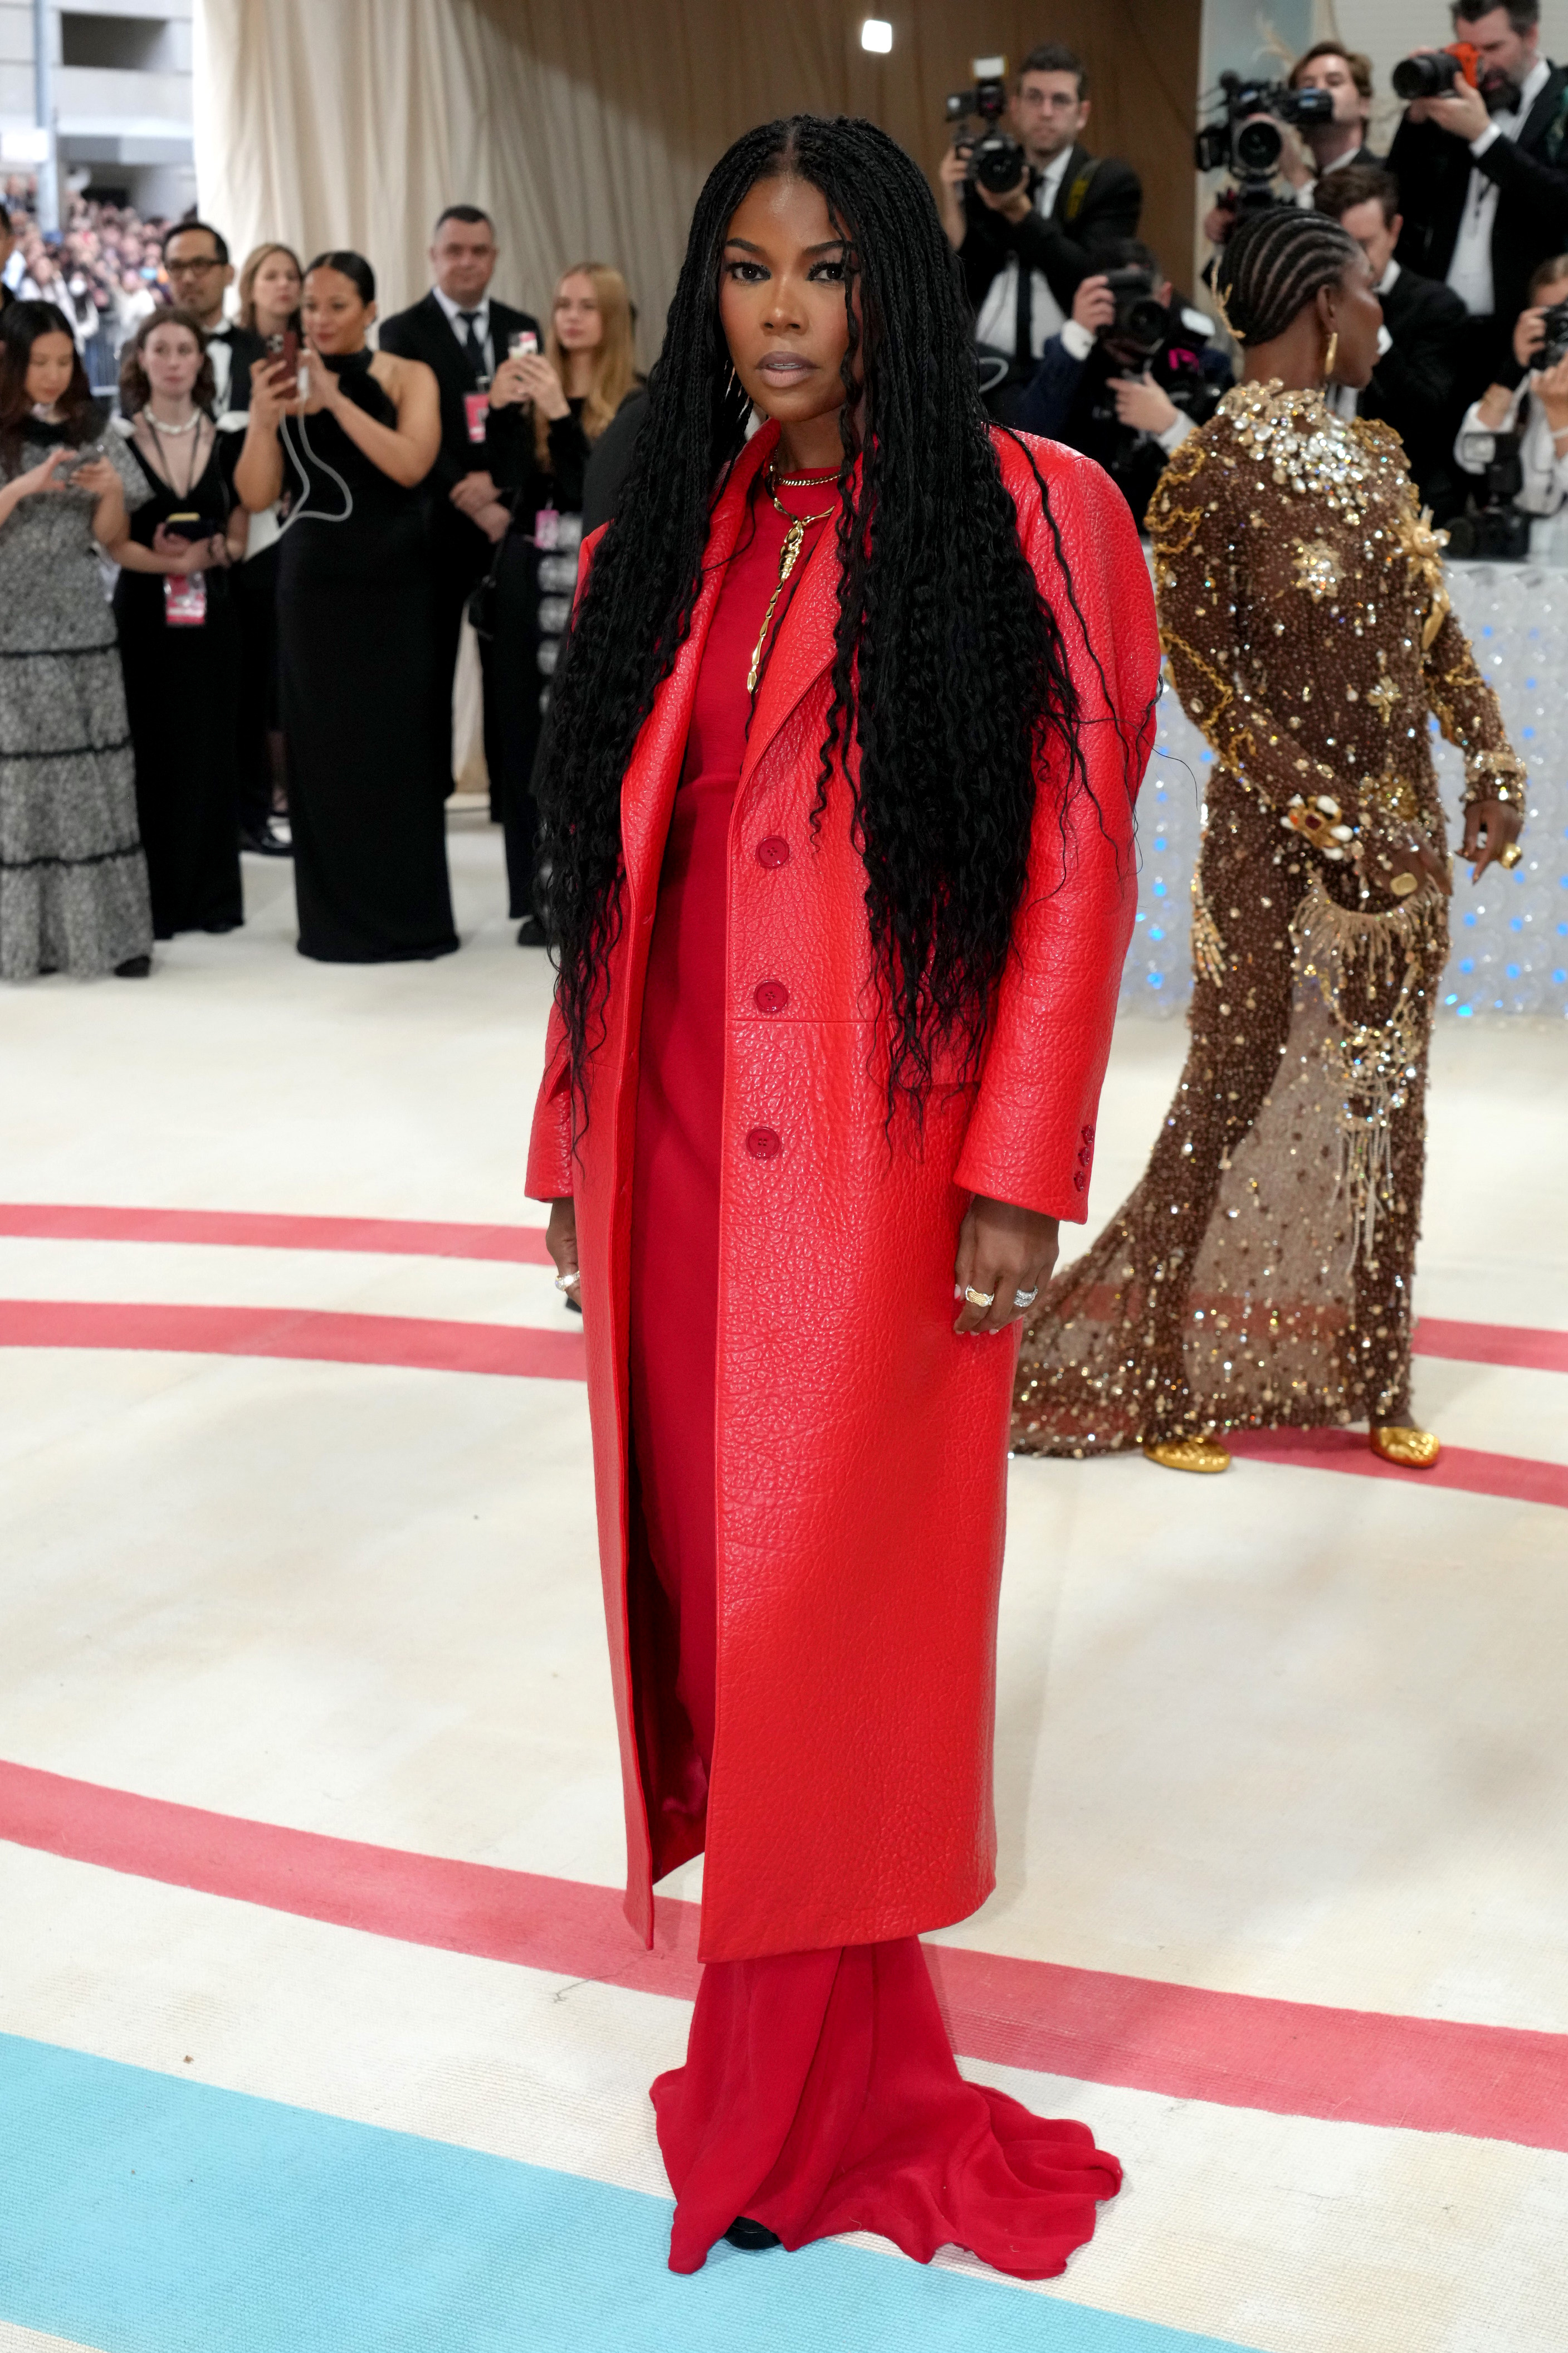 Celebrity in a red coat and dress on the red carpet with onlookers in background